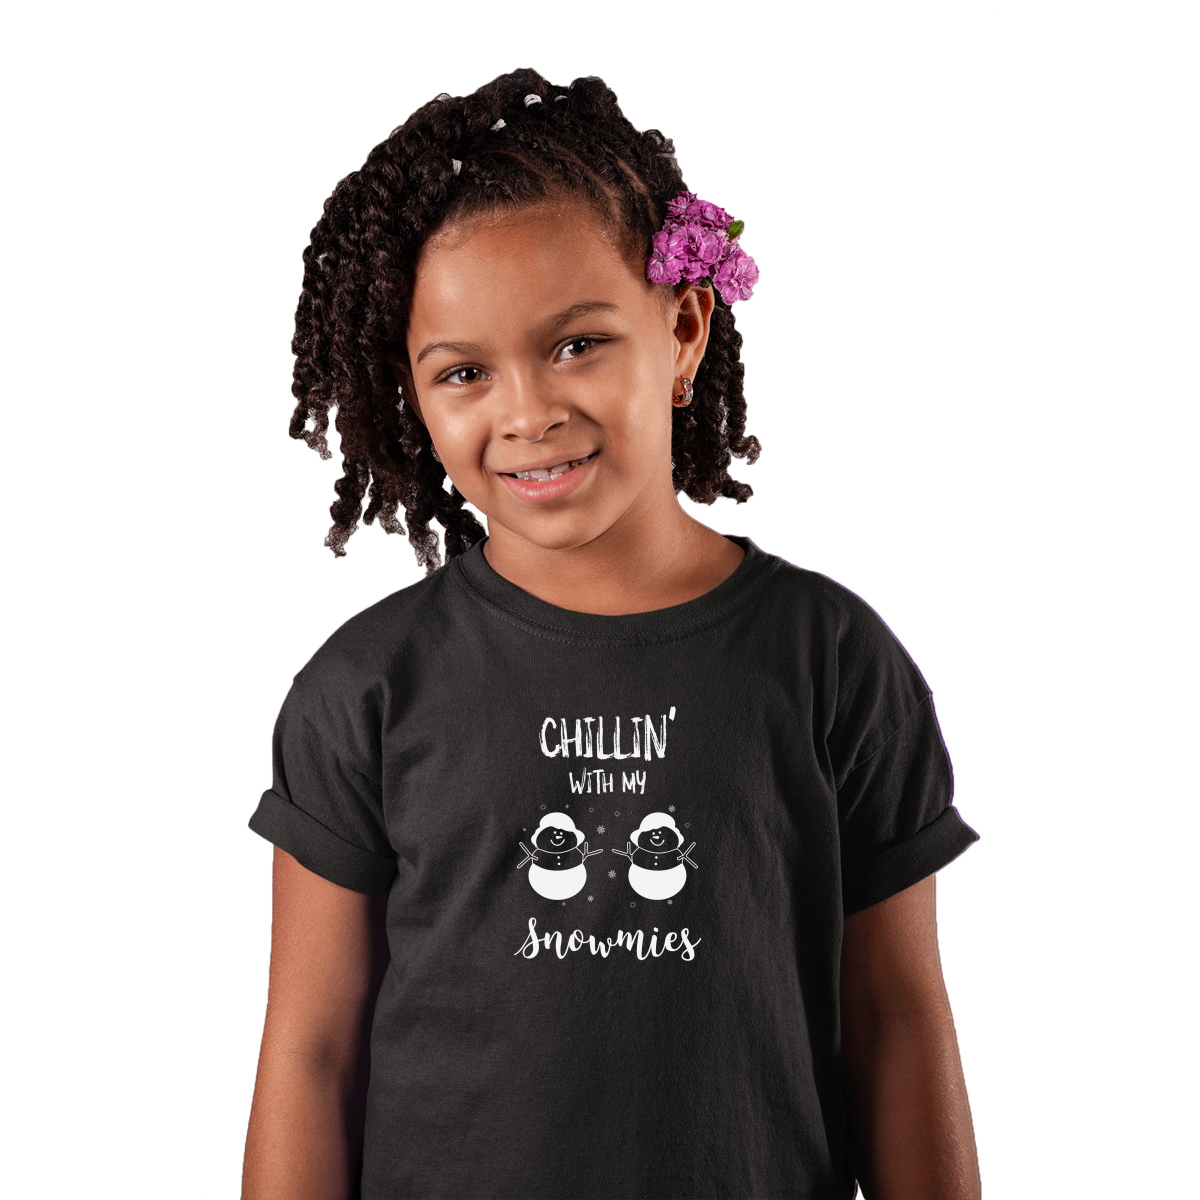 Chillin' With My Snowmies Kids T-shirt | Black